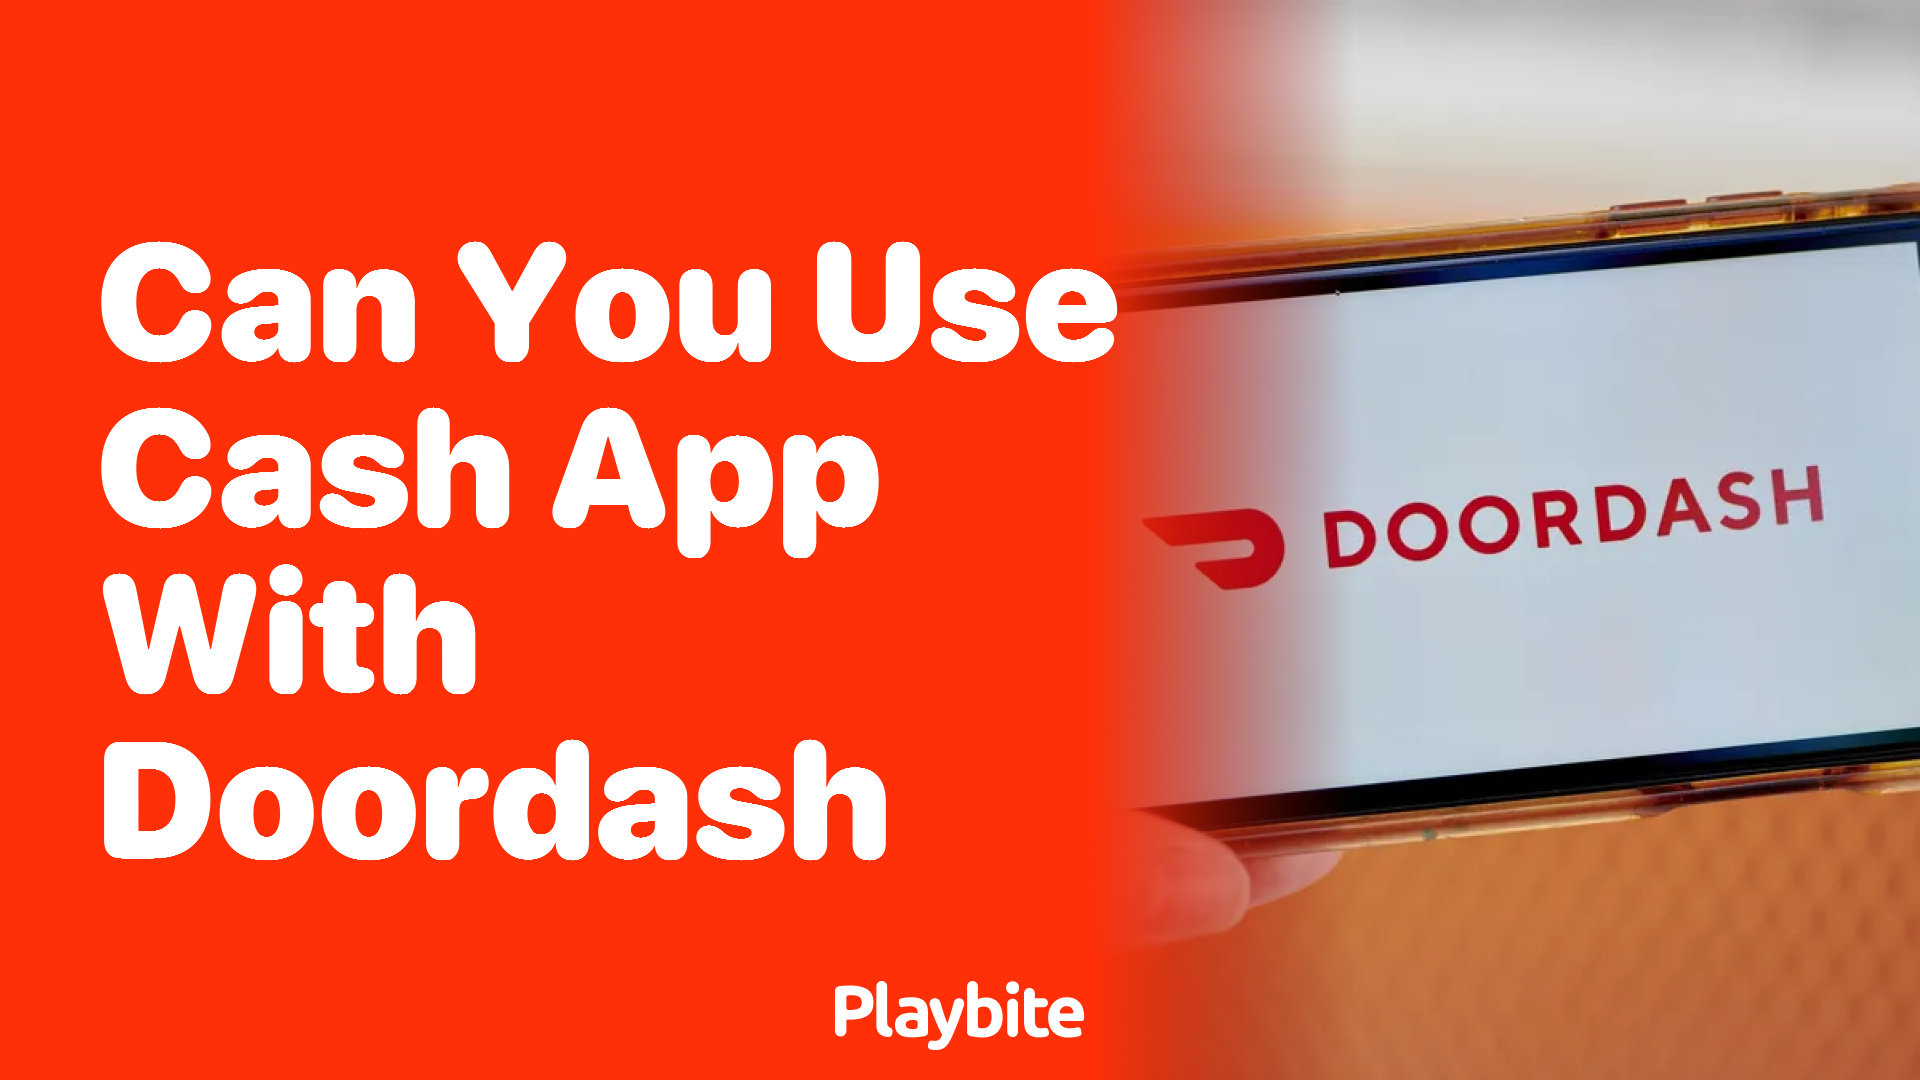 Can You Use Cash App with DoorDash? Here’s What You Need to Know